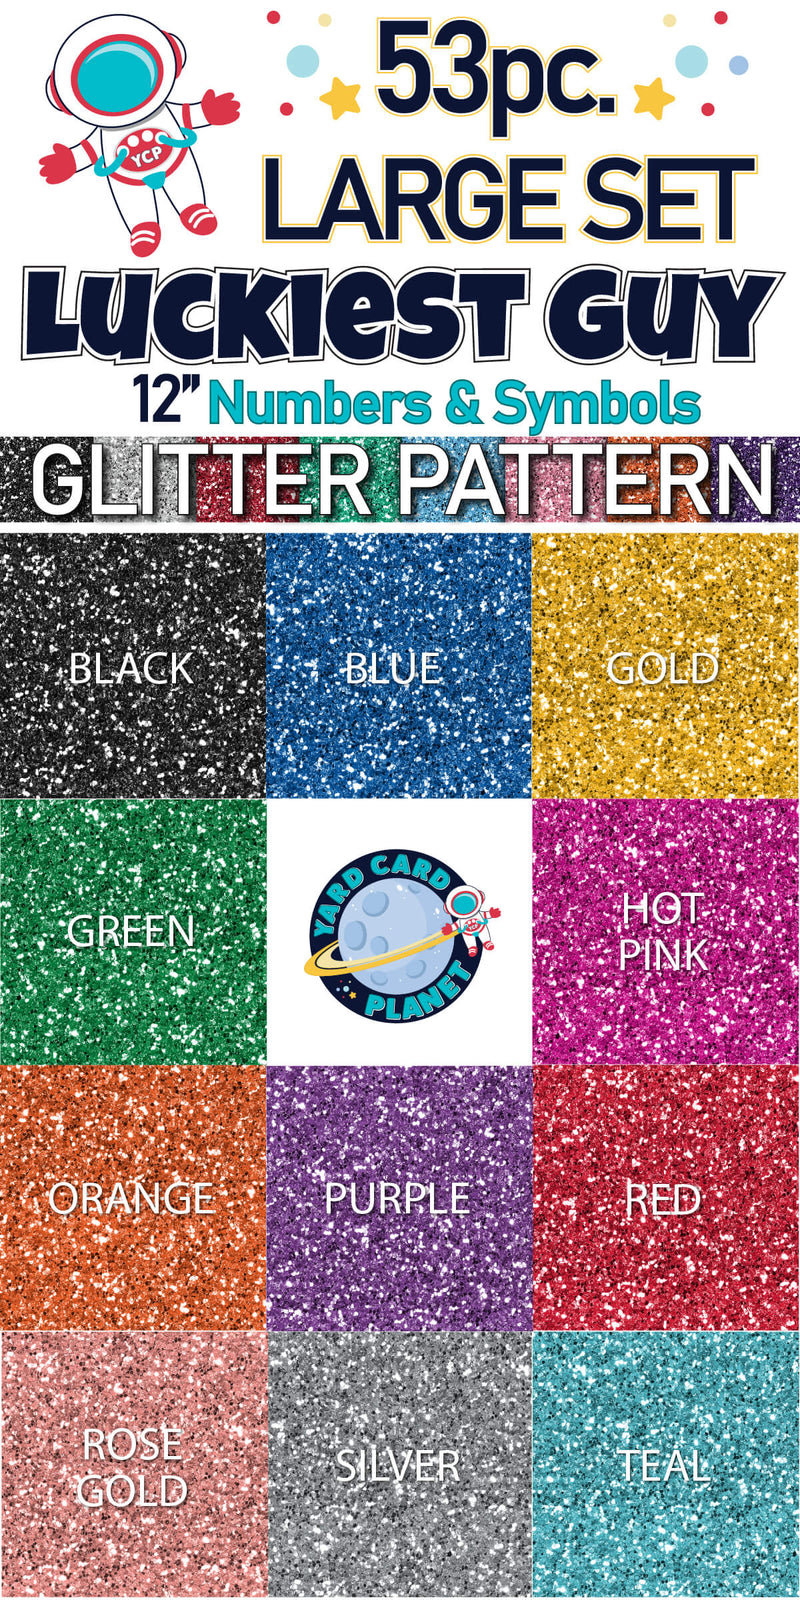 12" Luckiest Guy 53 pc. Numbers and Symbols Set in Glitter Pattern